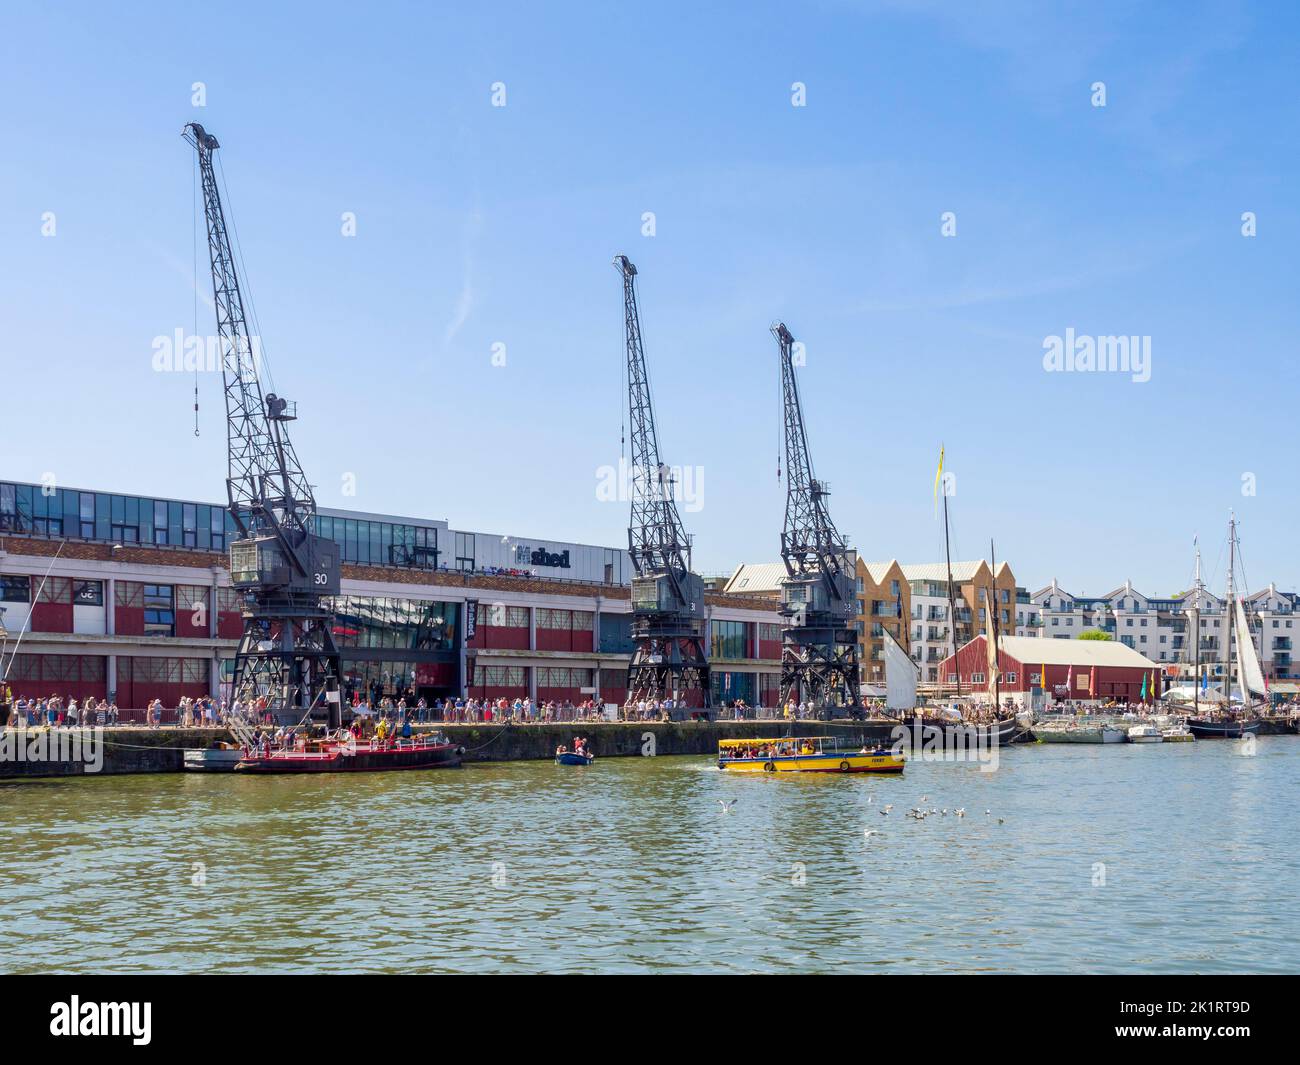 The old cranes on the quay side outside the M Shed Museum at the Bristol floating harbour during the Bristol Harbour Festival in 2022, England, UK. Stock Photo